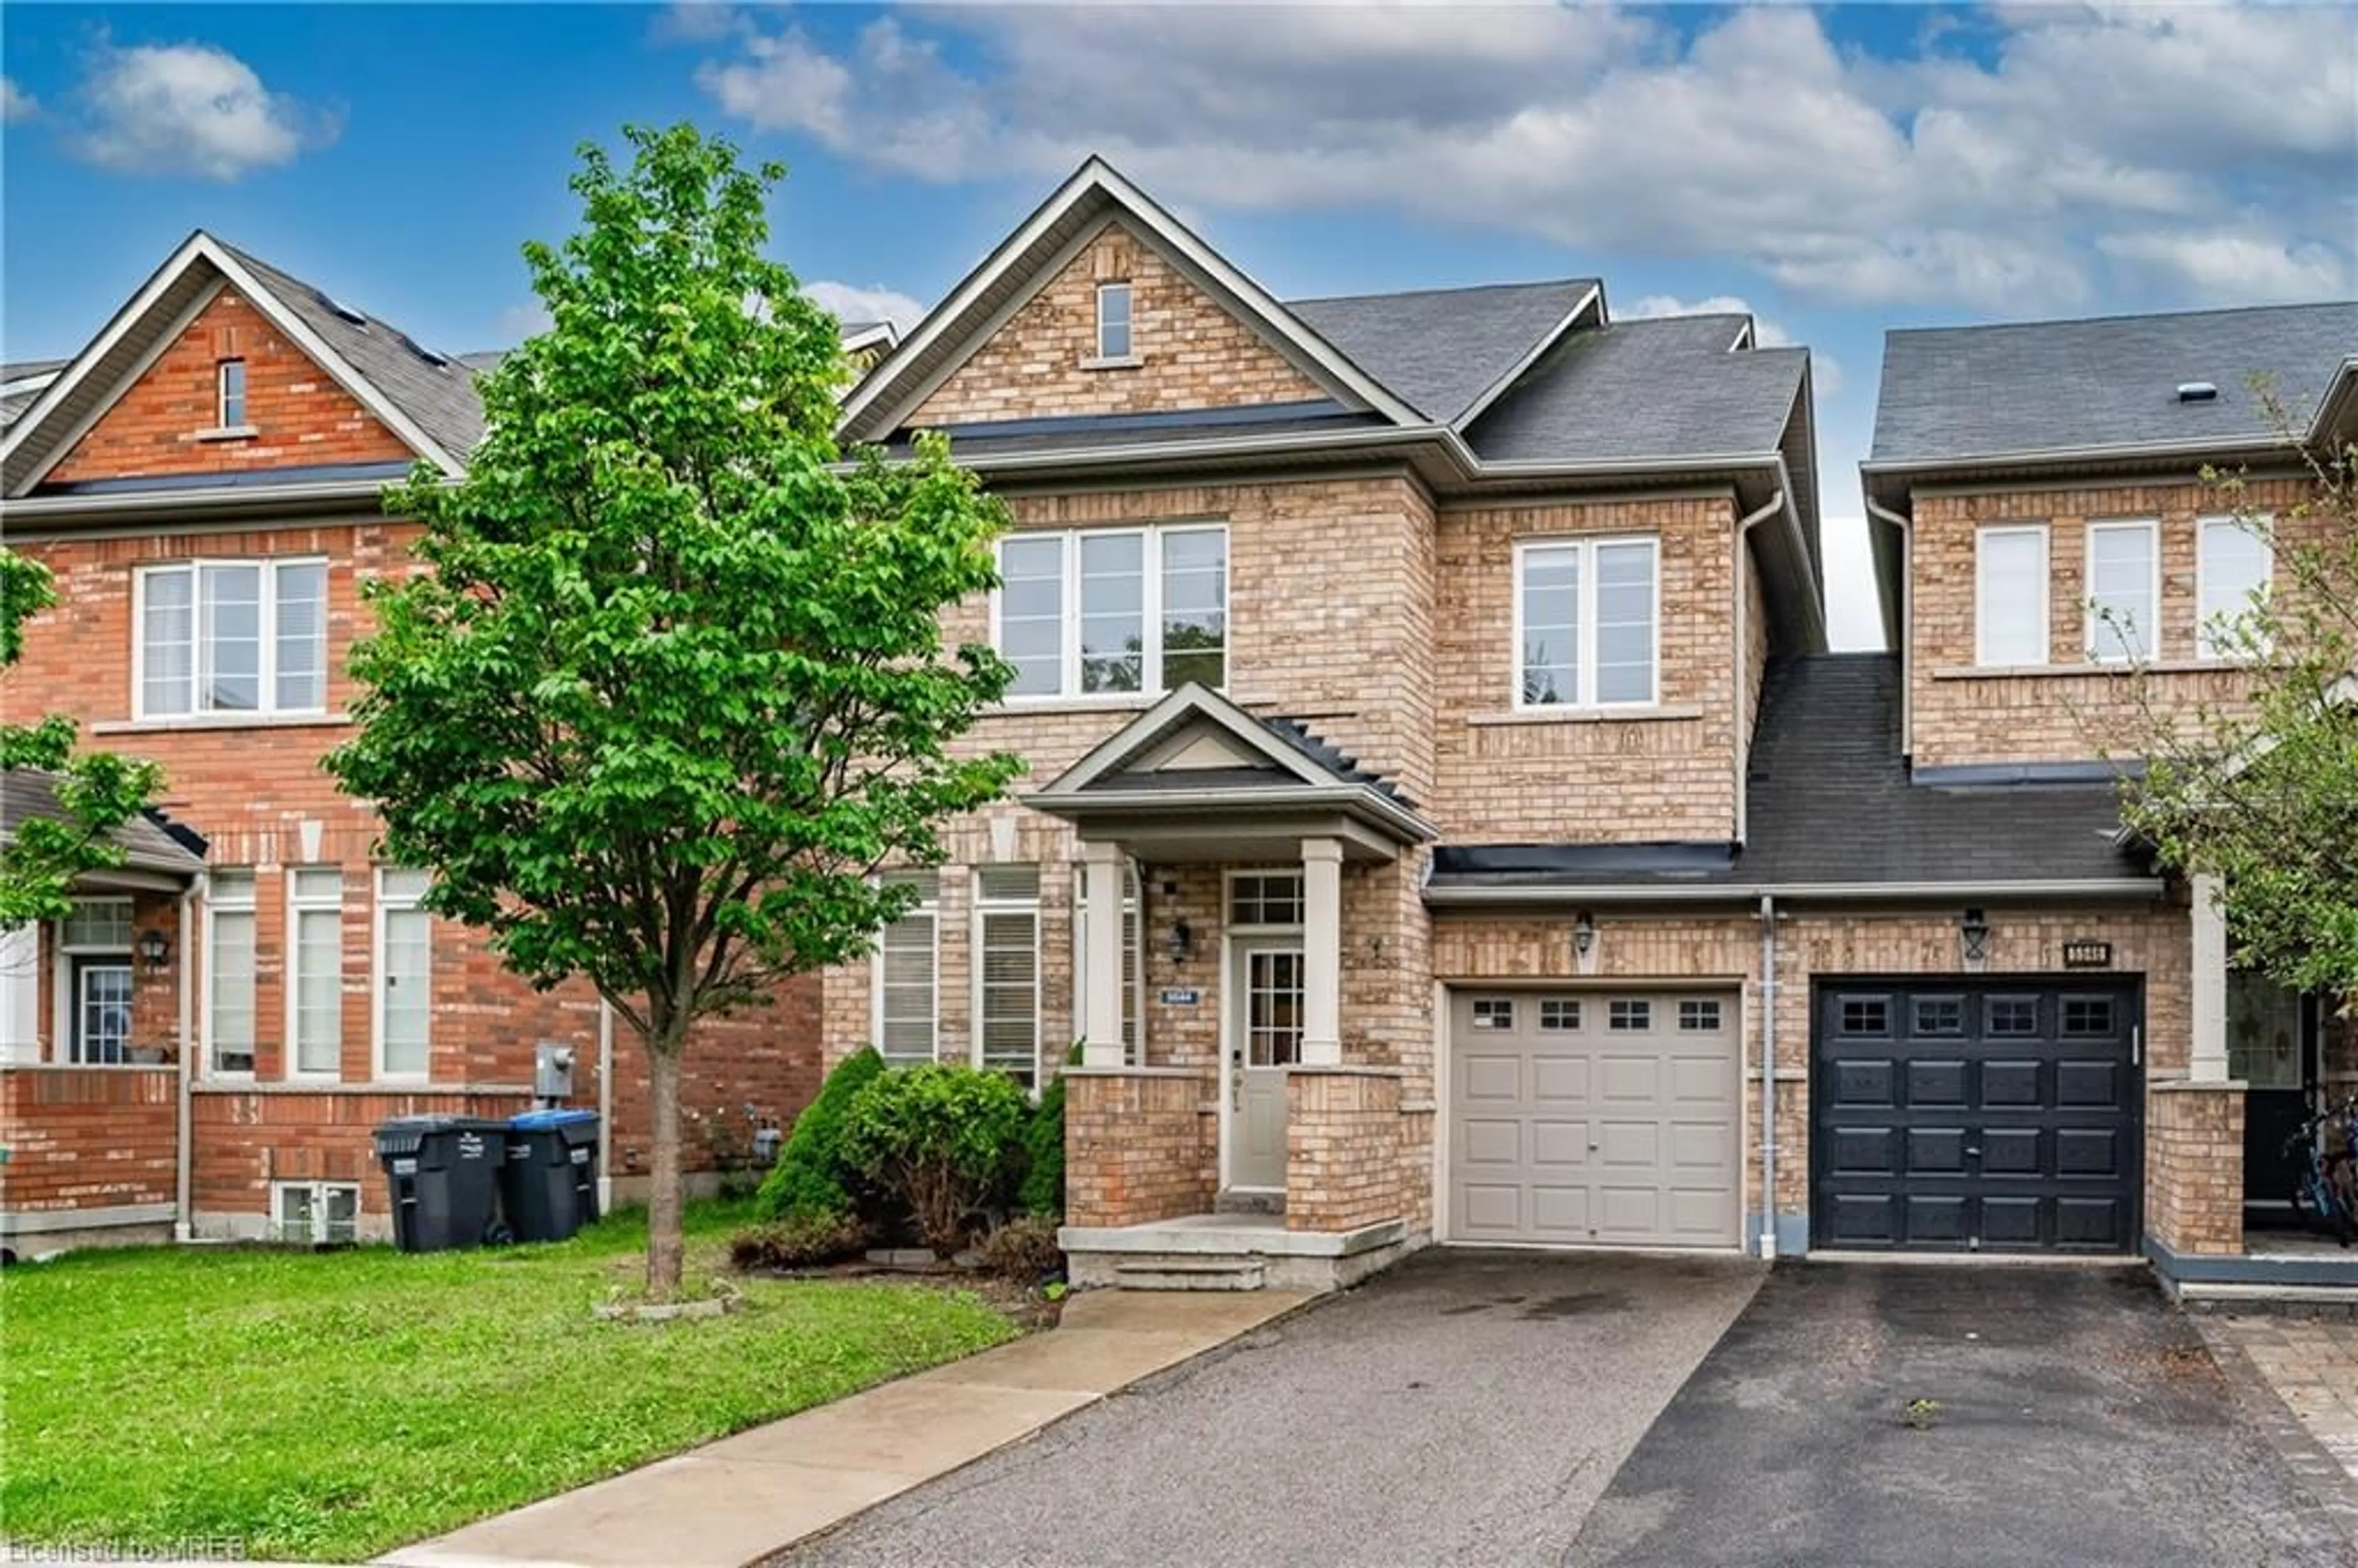 Home with brick exterior material for 5544 Waterwind Cres, Mississauga Ontario L5M 0G2